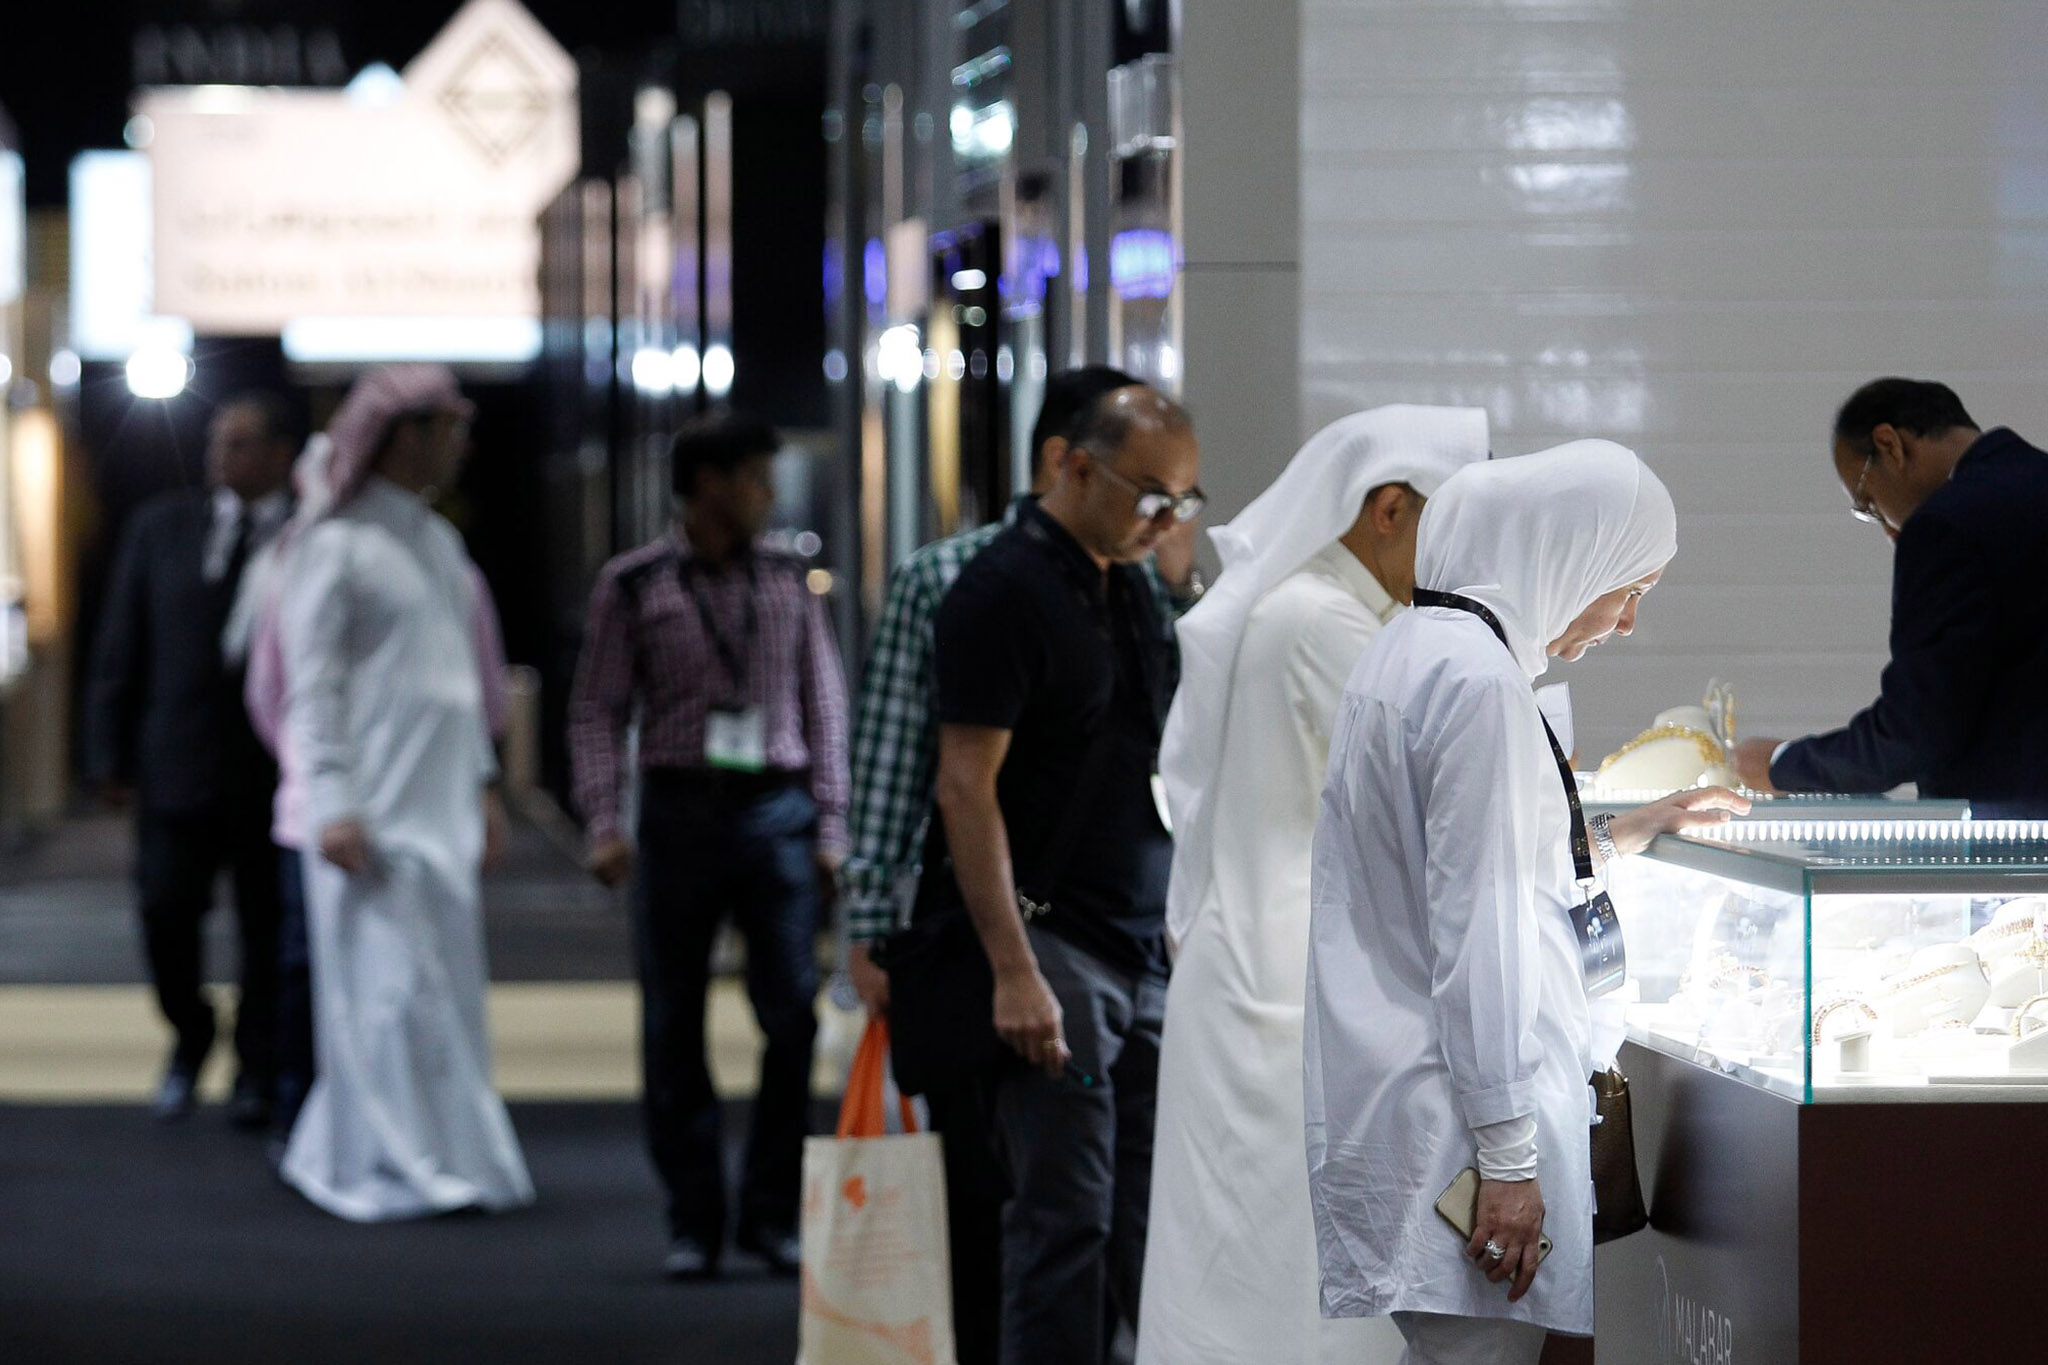 Anticipation builds ahead of VOD Dubai International Jewellery Show as new exhibitors are announced